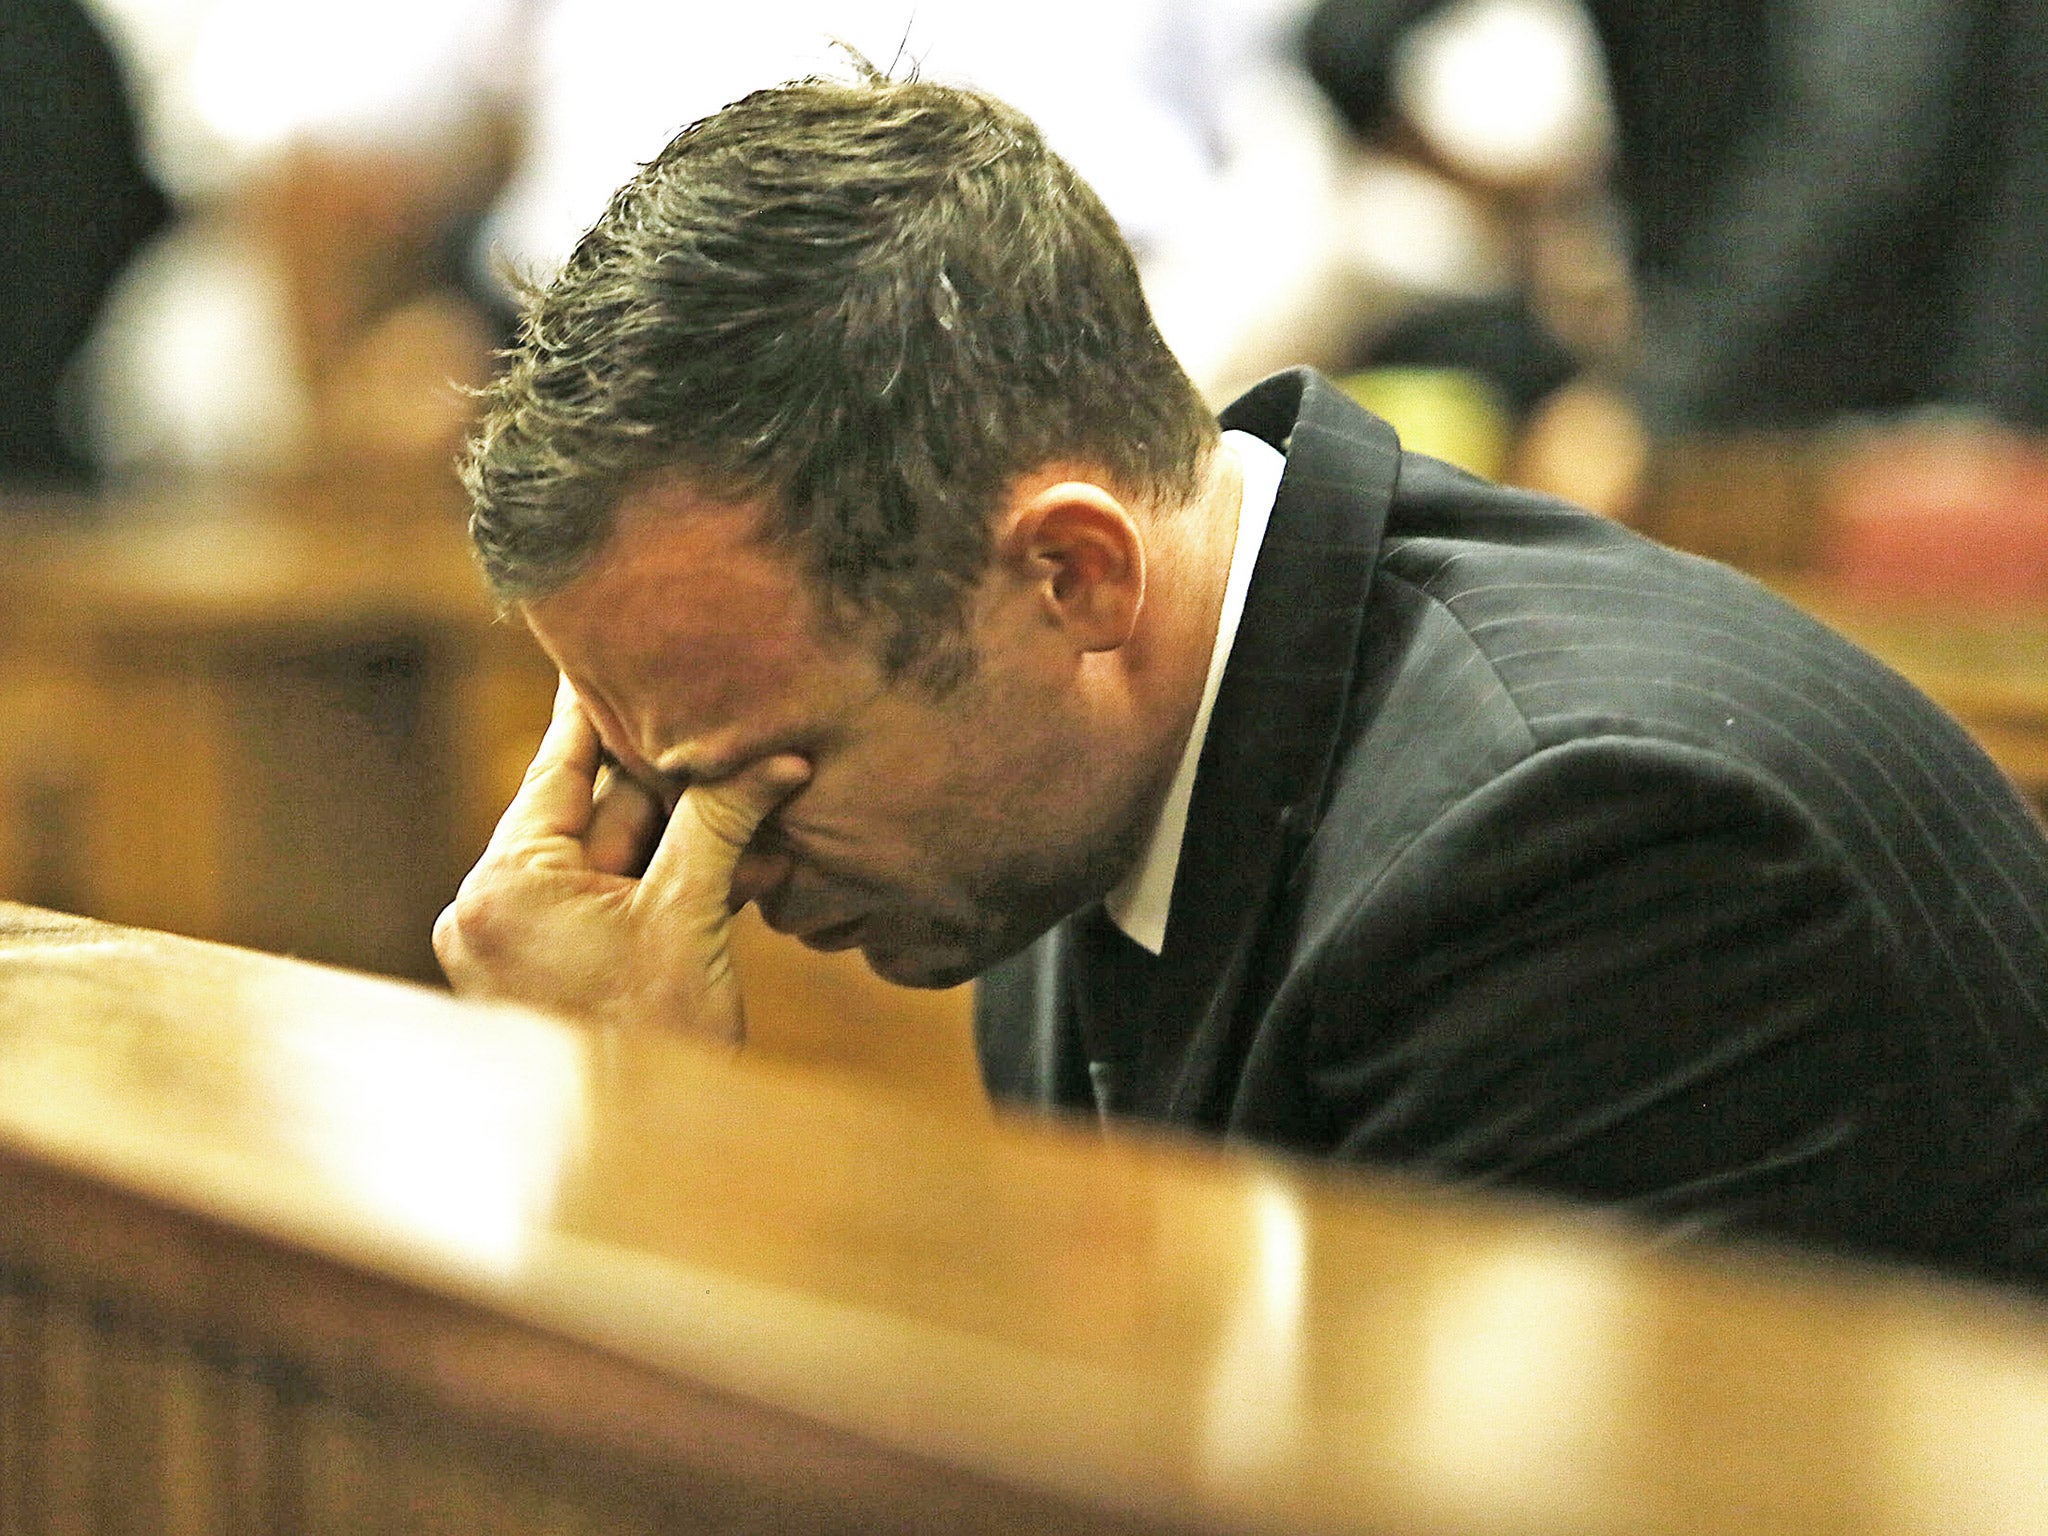 An emotional Oscar Pistorius during his trial last year